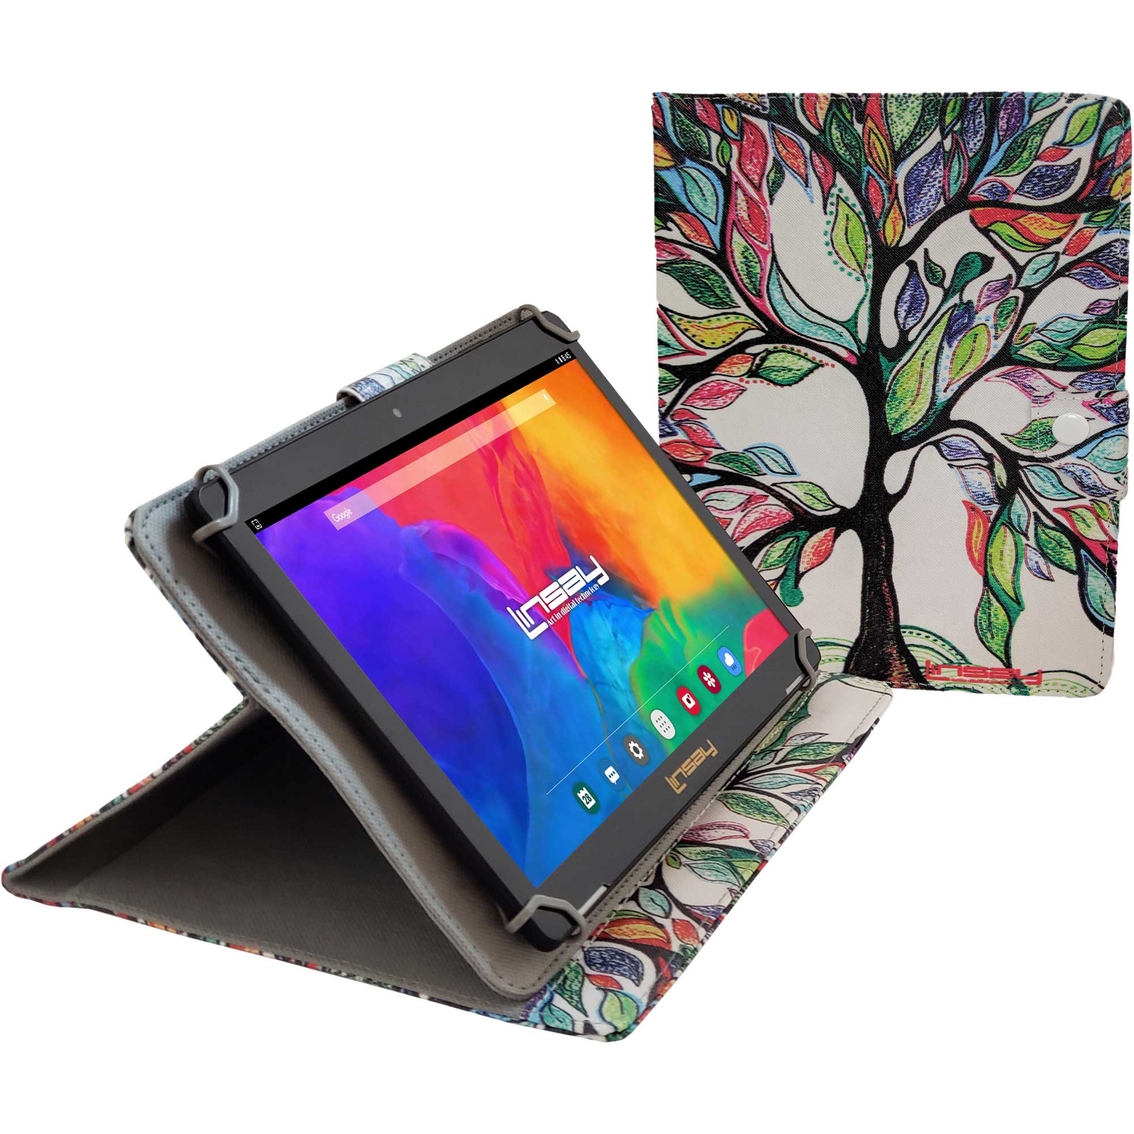 Linsay 10.1 in. IPS 2GB RAM 32GB Tablet with Tree Marble Case, Holder and Pen - Image 2 of 3